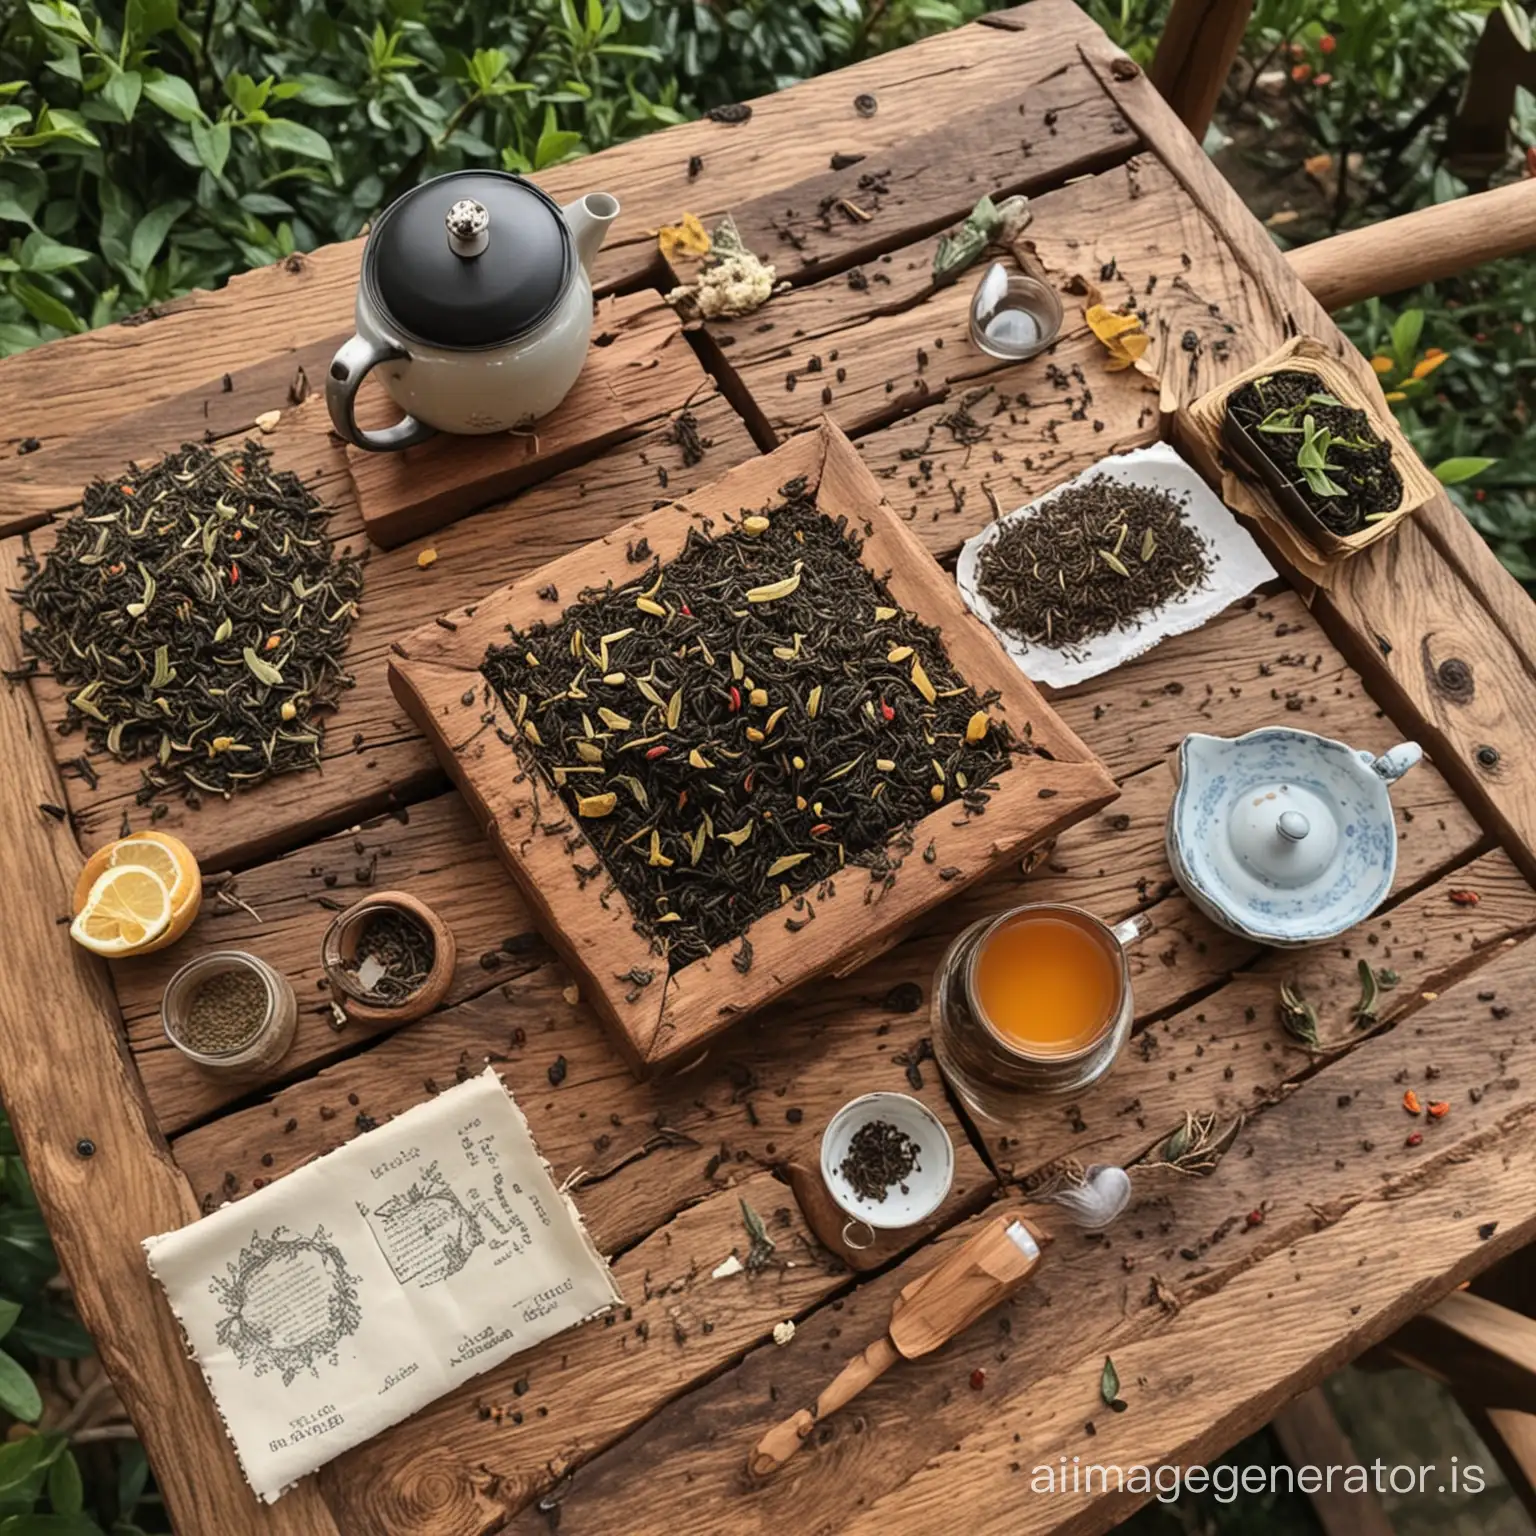 show 10 types of tea in the woody table with cool and cozy atmospher